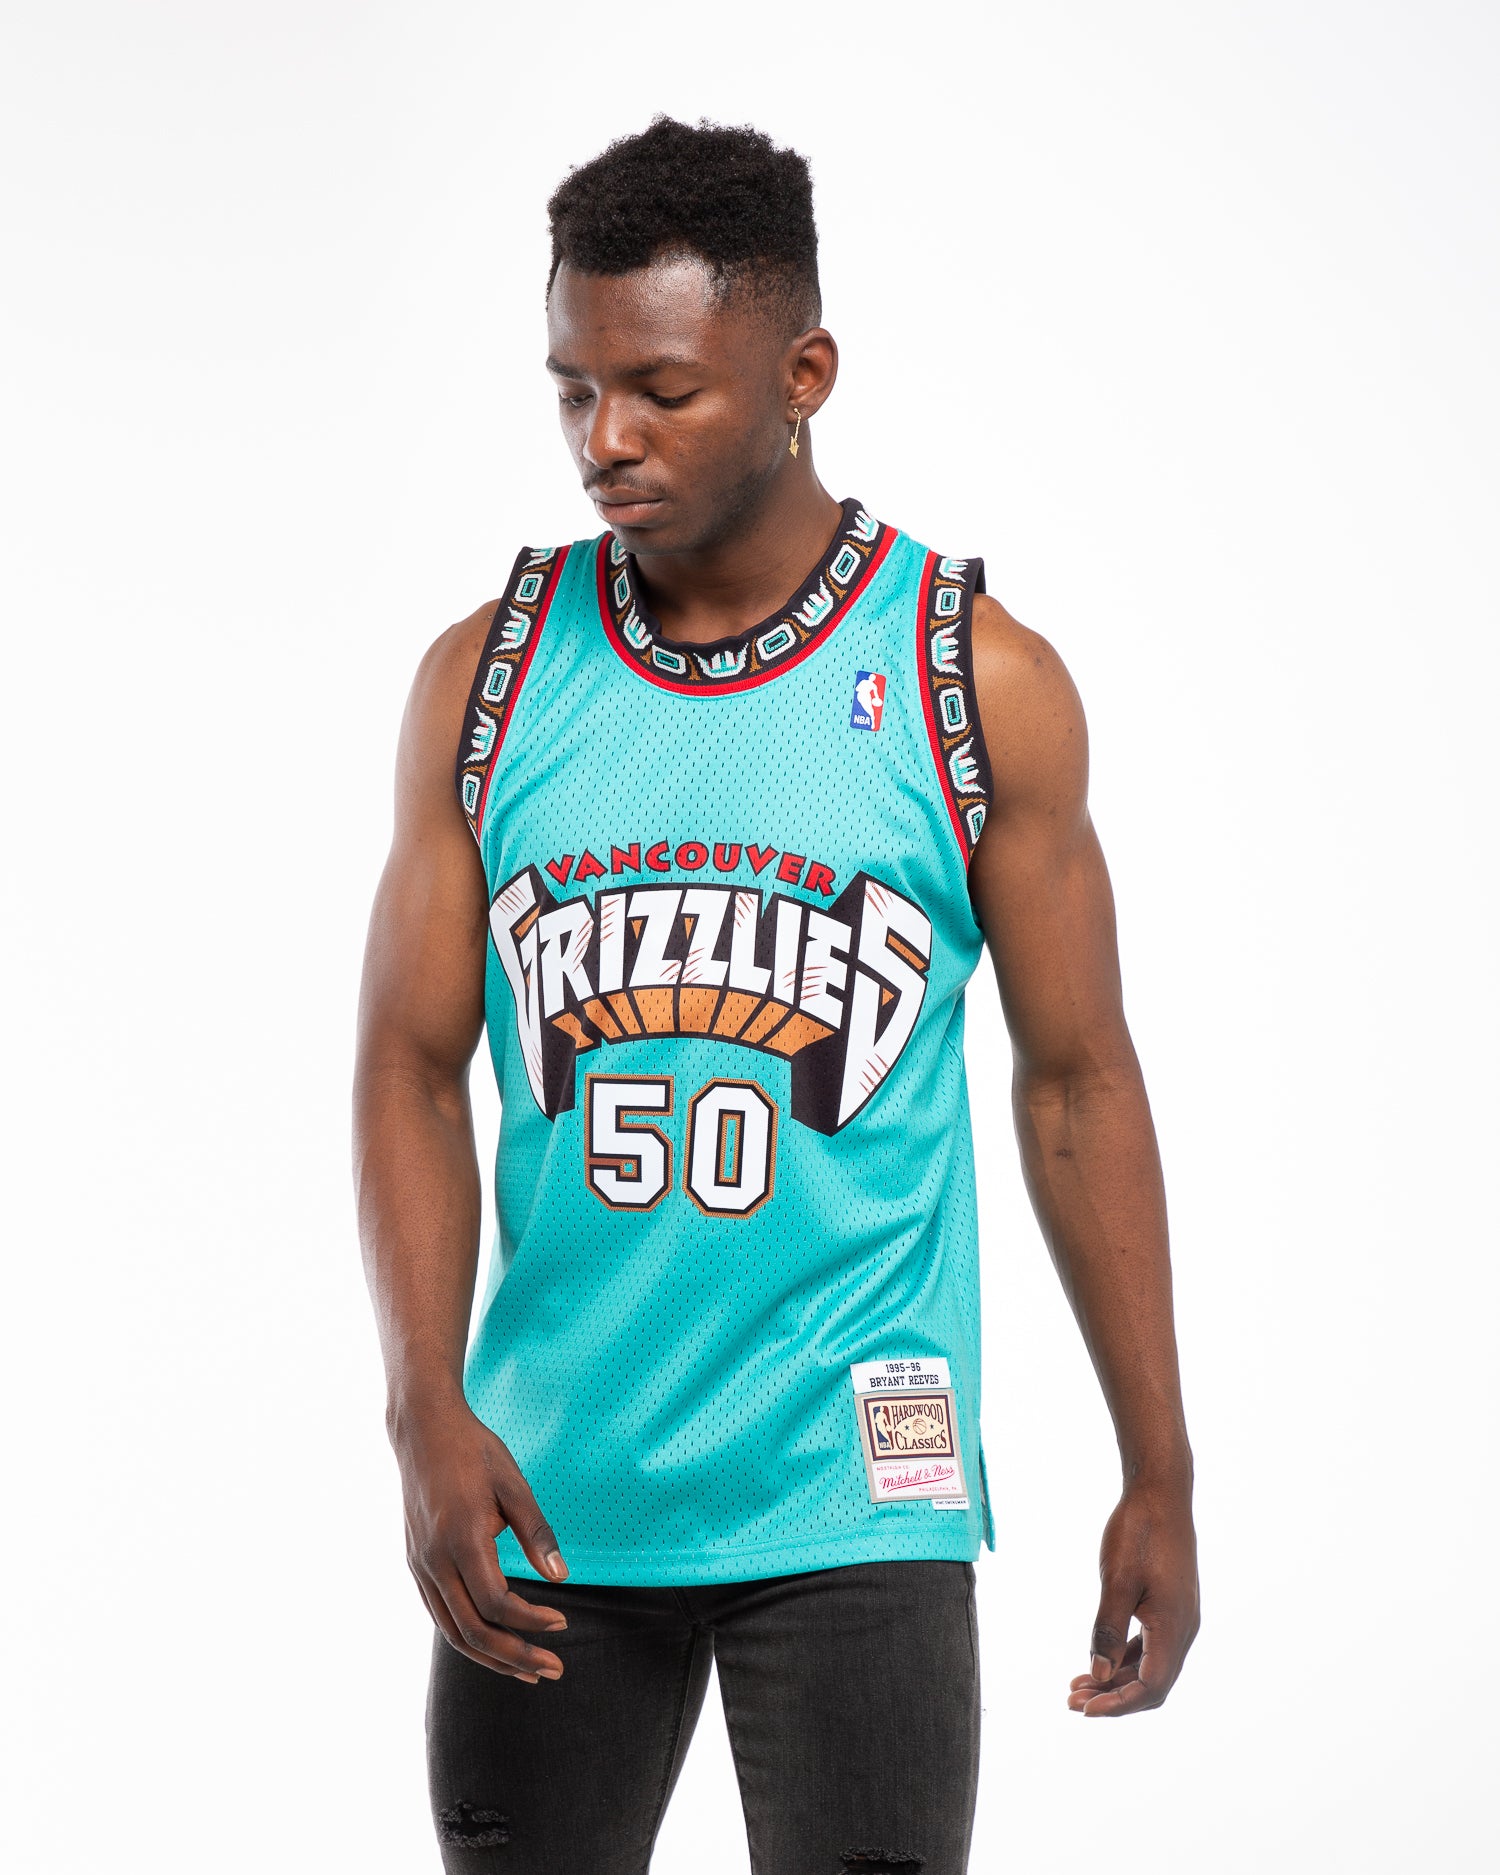 bryant reeves vancouver grizzlies jersey